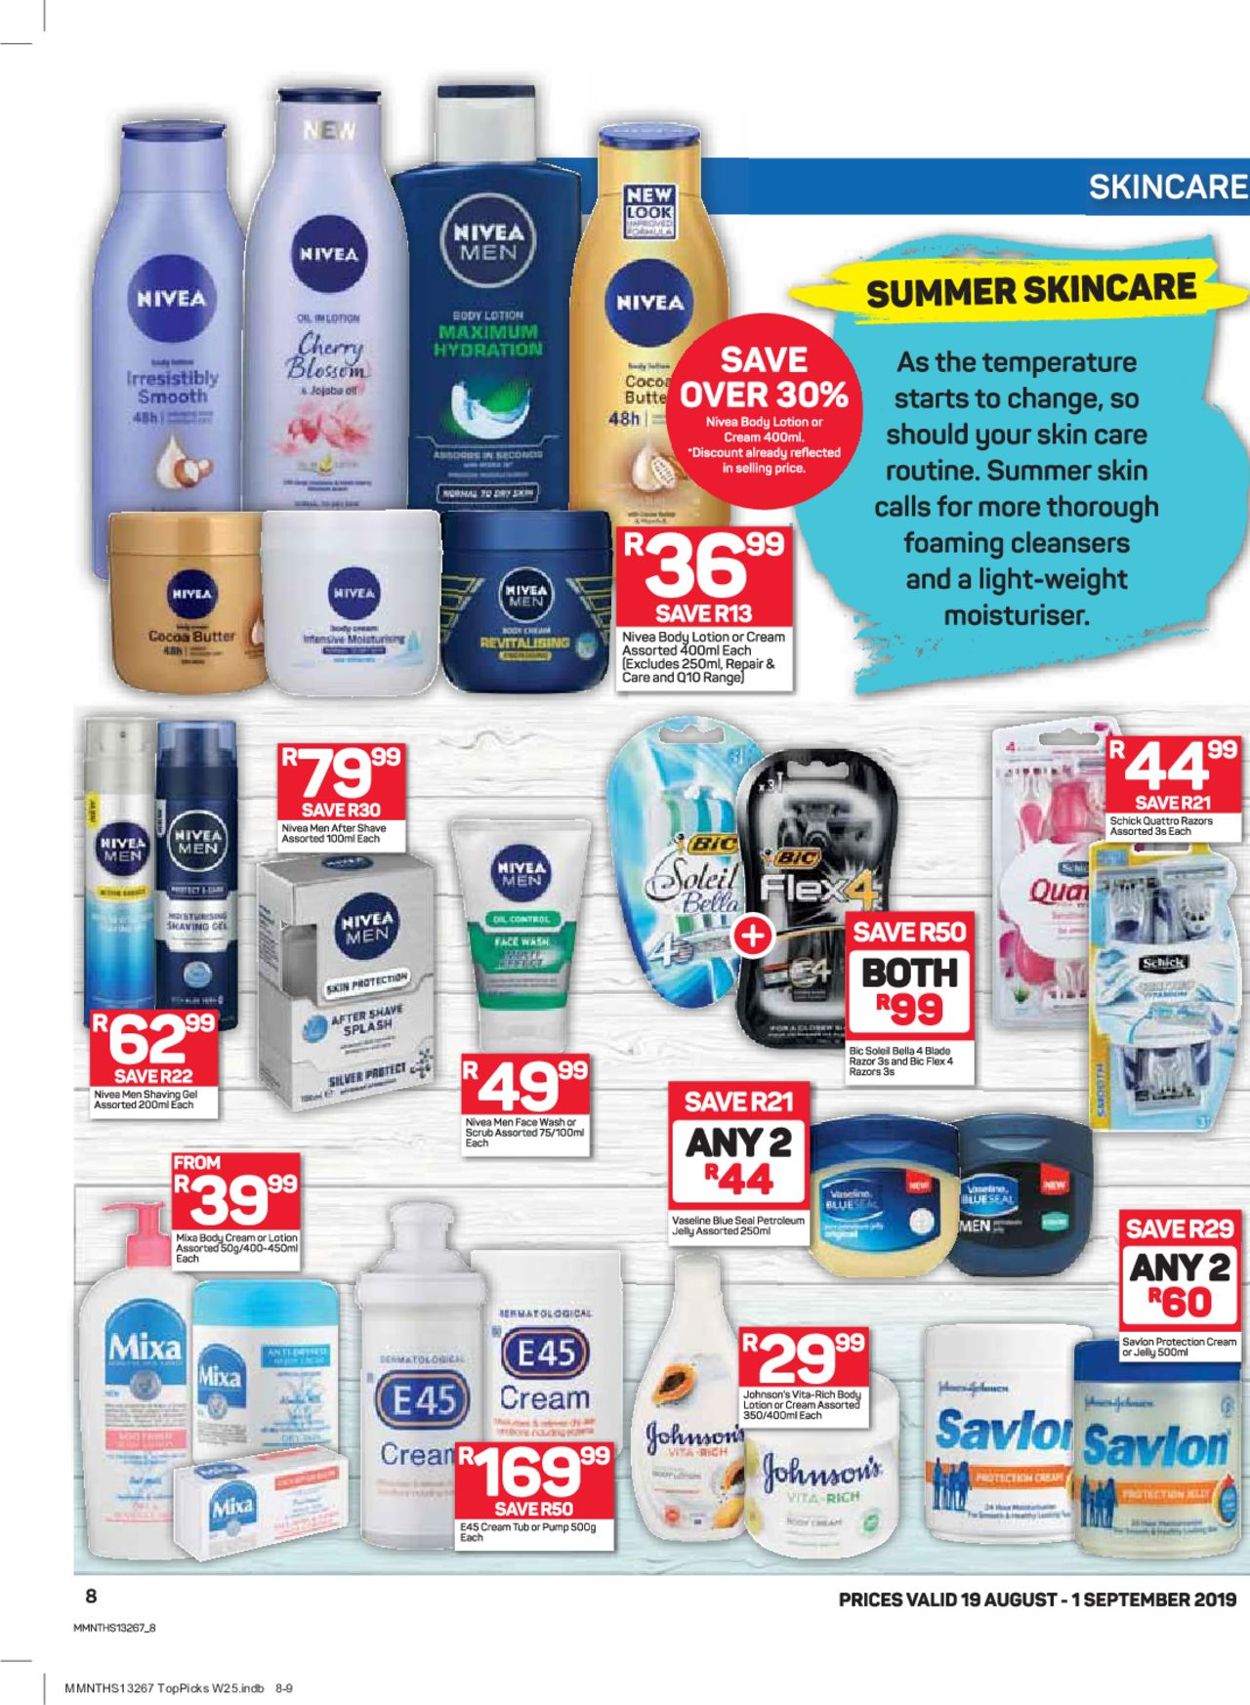 Pick n Pay Catalogue - 2019/08/19-2019/09/01 (Page 2)